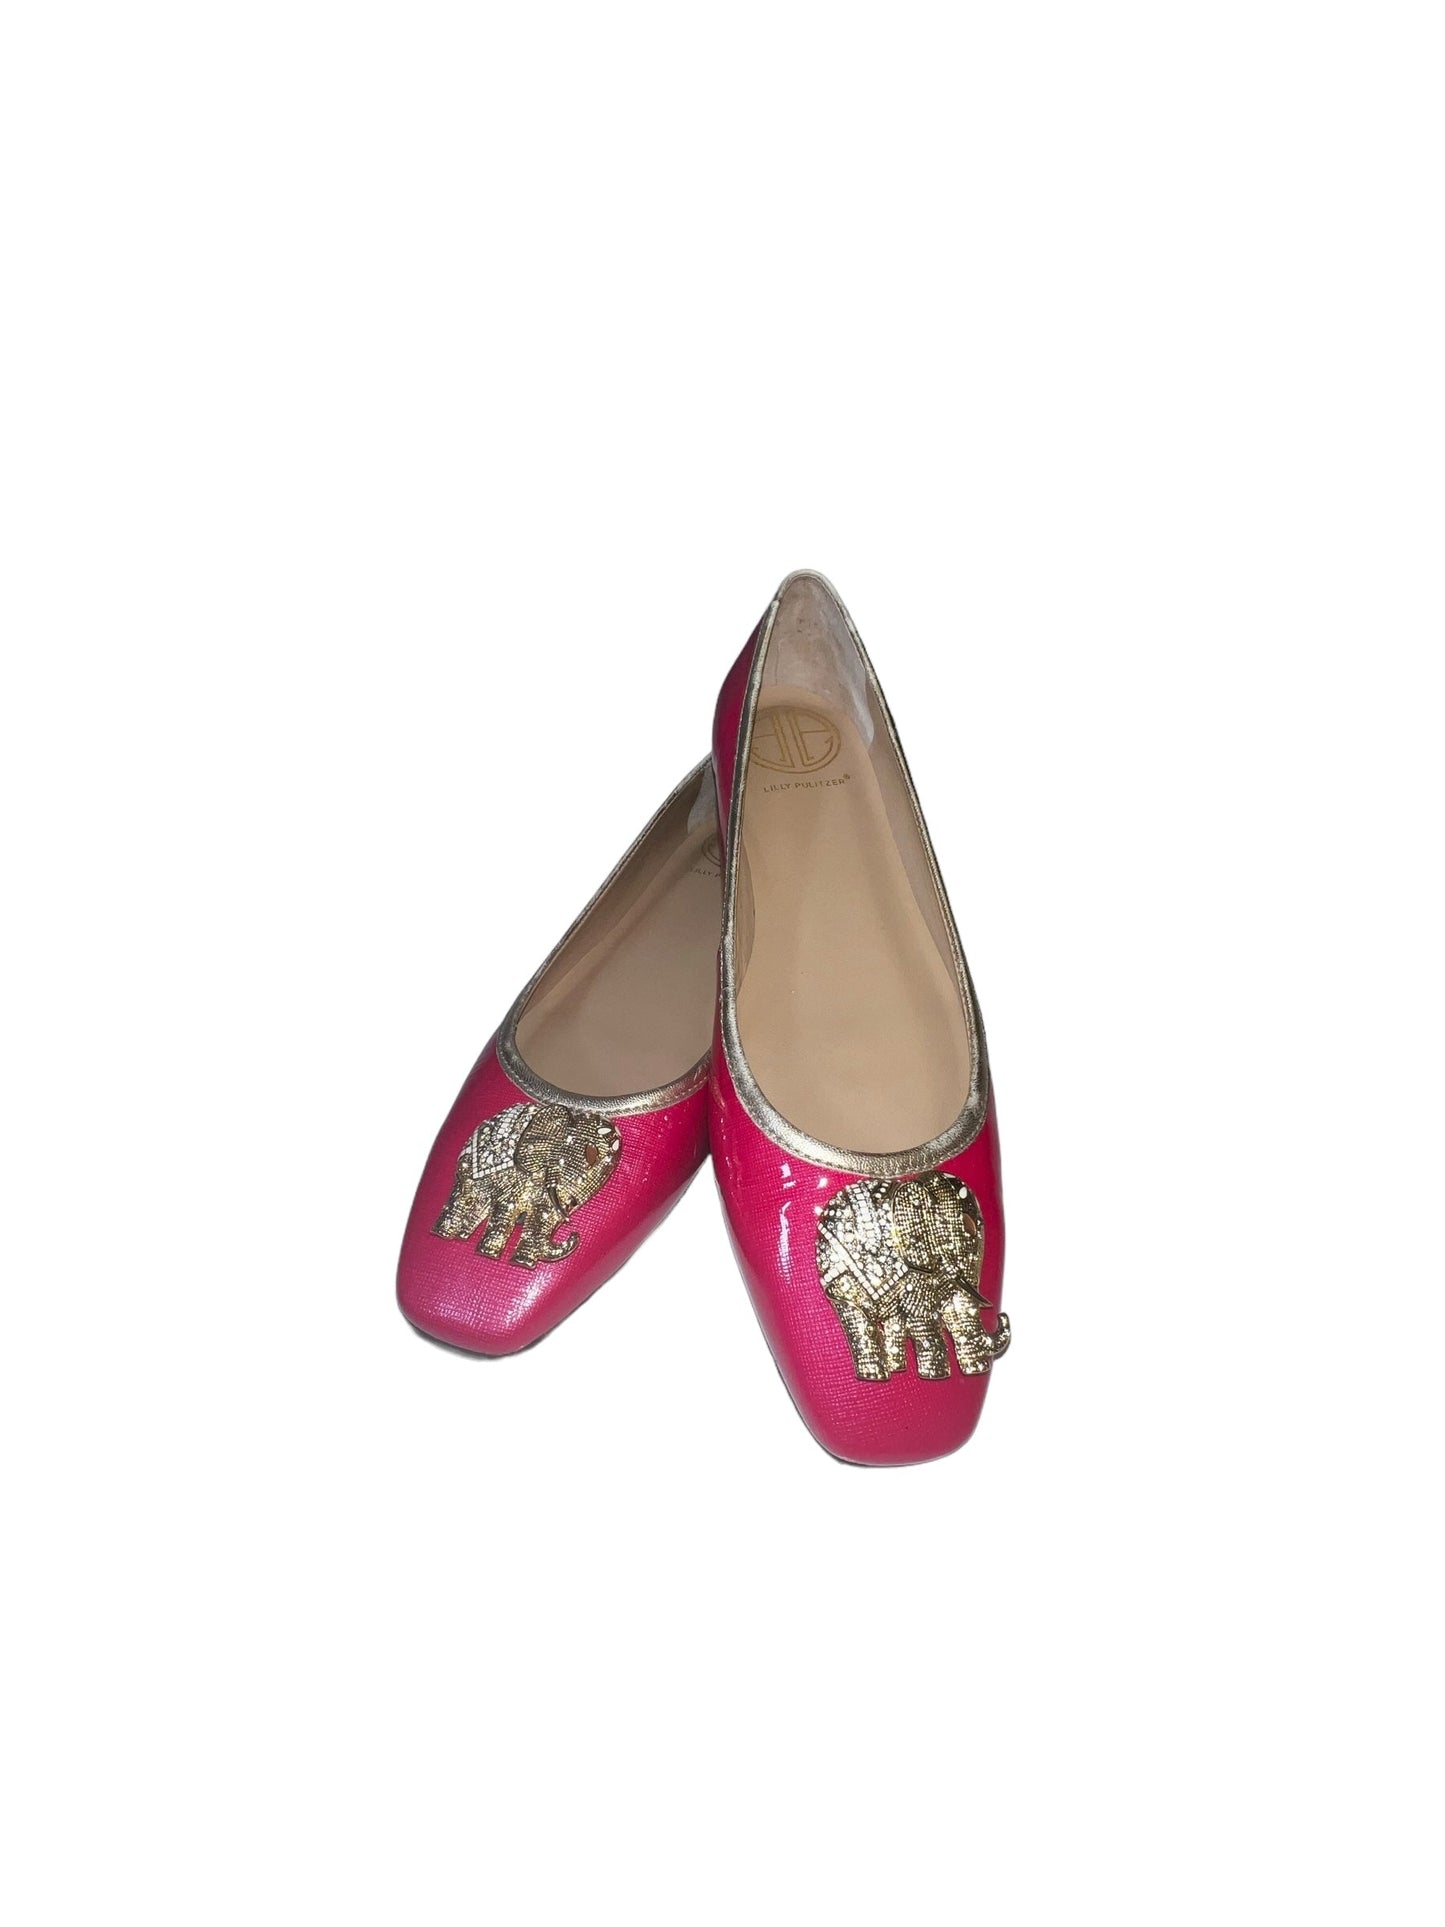 Pink Shoes Flats Lilly Pulitzer, Size 8